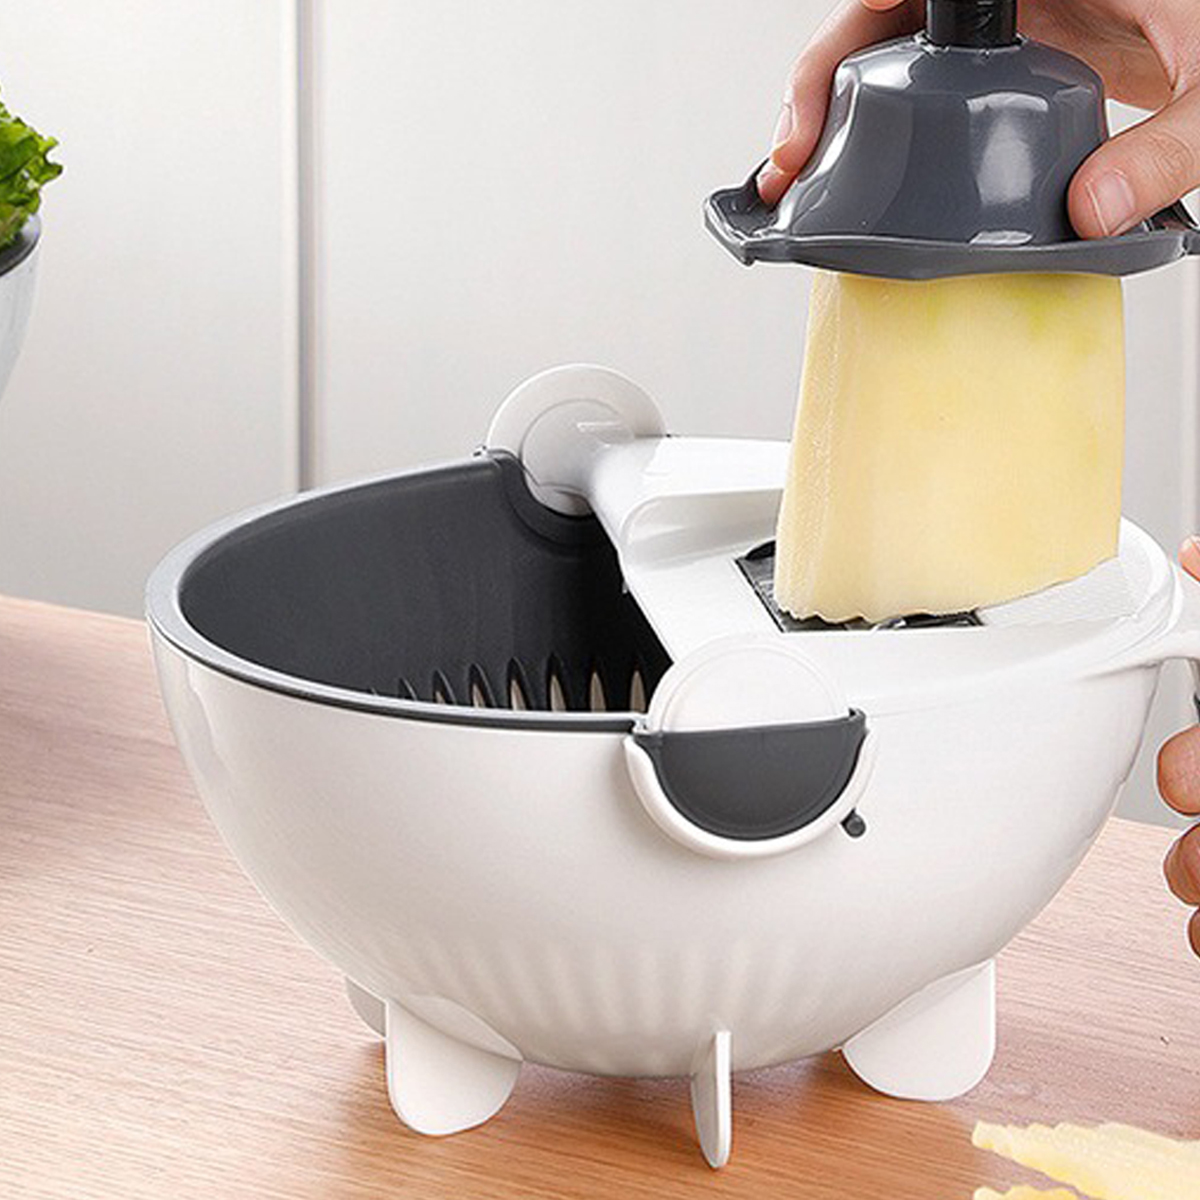 9-in1-Rotate-Vegetable-Cutter-Chopper-Fruit-Grater-Slicer-with-Basket-Drain-1737062-6